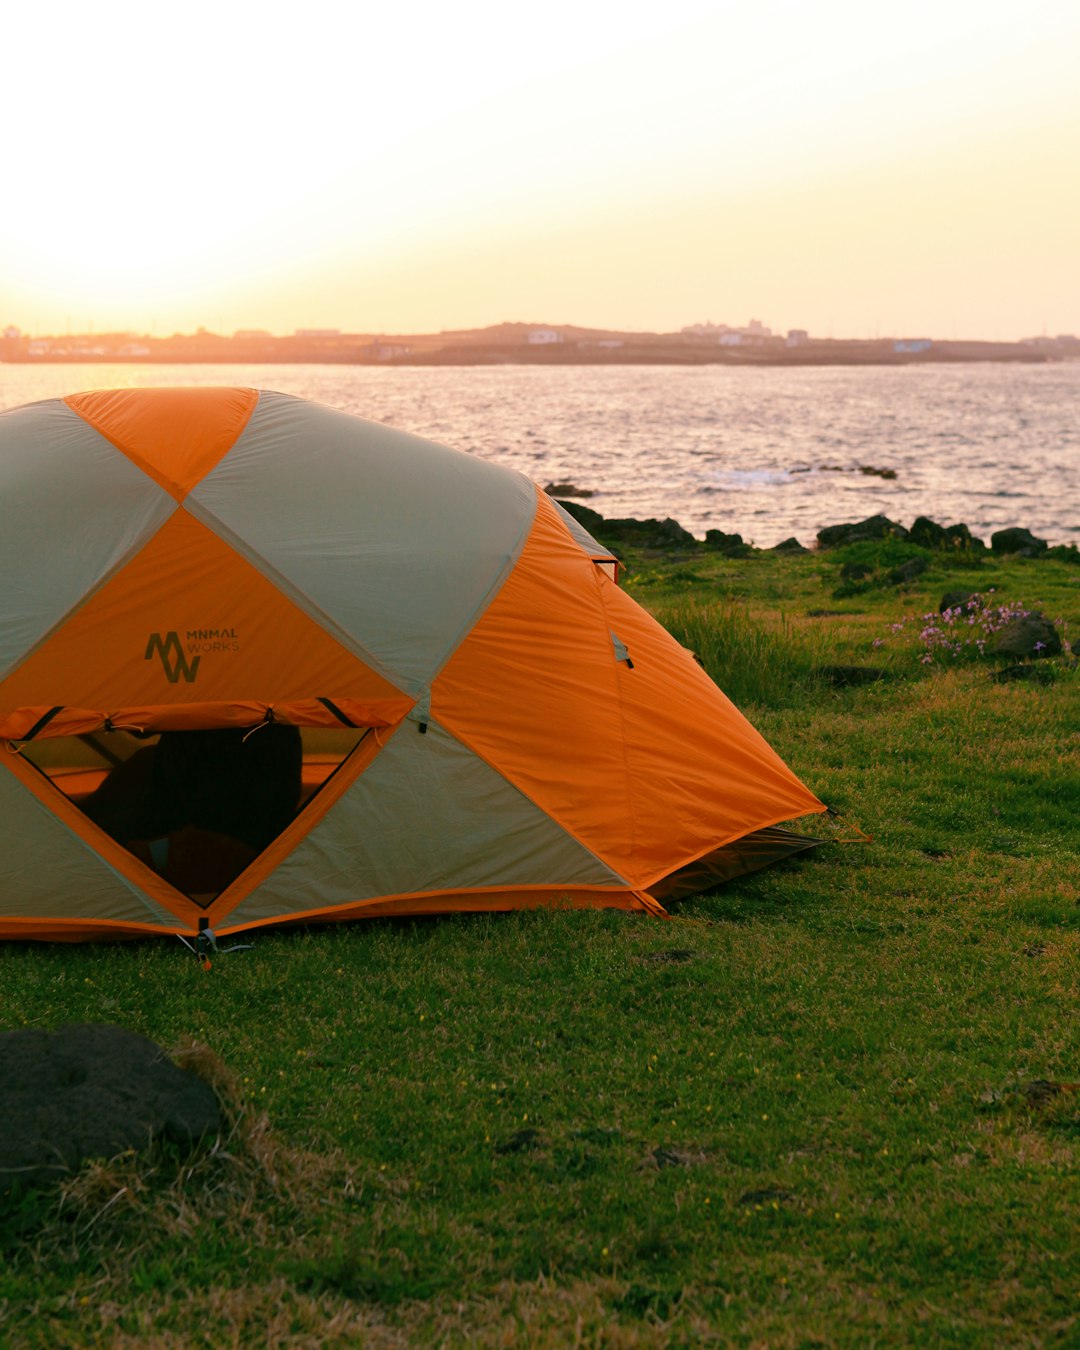 orange and gray dome tent on green grass field near body of water during daytime